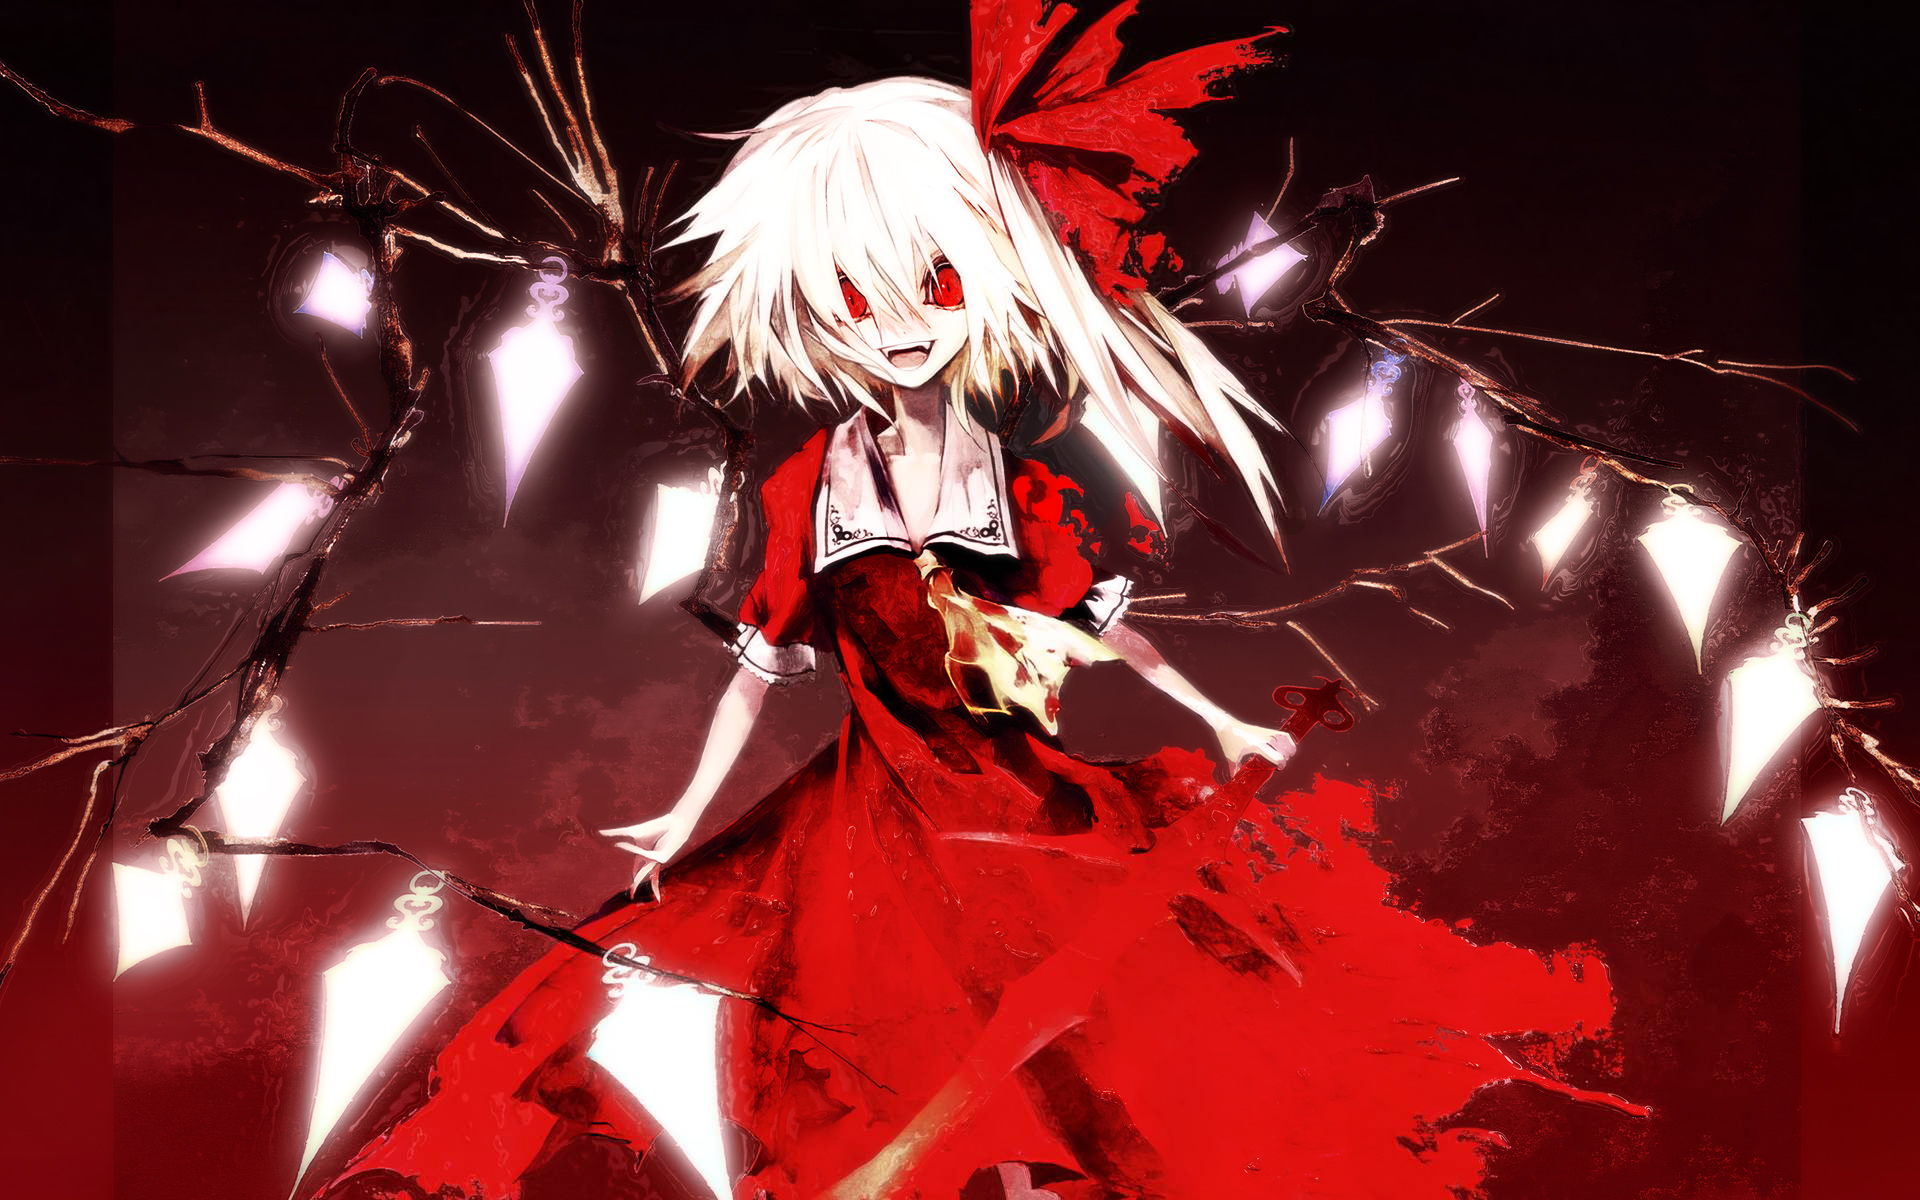 Flandre Scarlet with short hair, surrounded by blood.